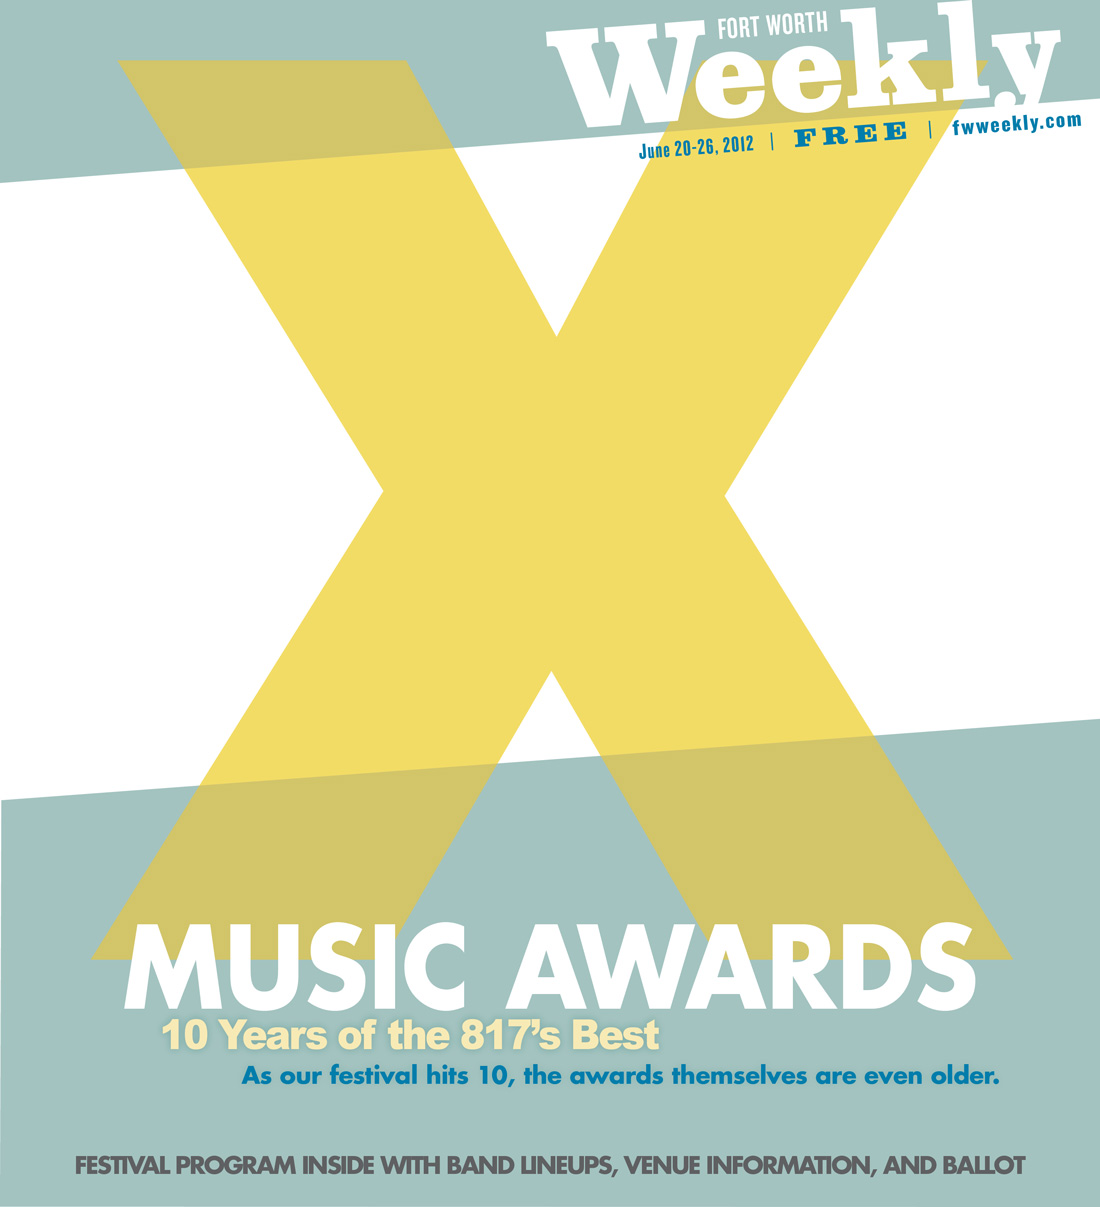 2012 Fort Worth Weekly Music Awards: 10 Years of the 817’s Best - Fort ...